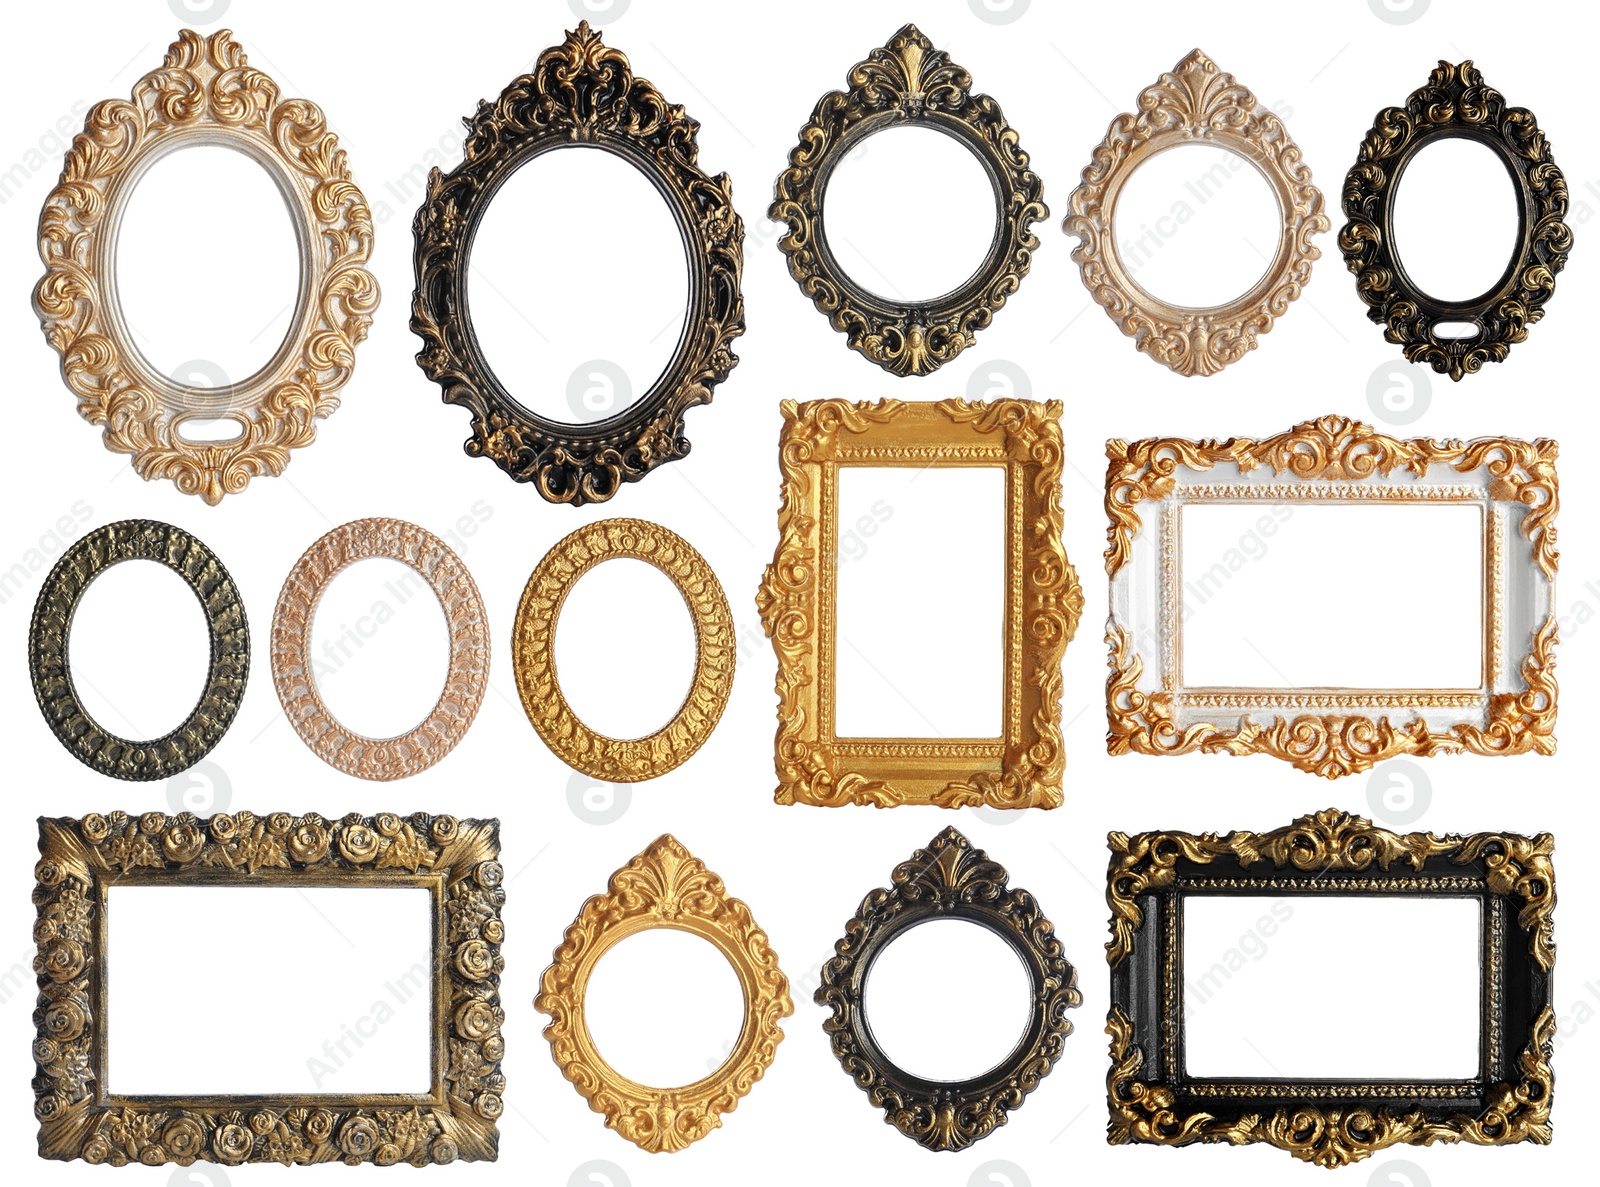 Image of Set of different old fashioned frames on white background